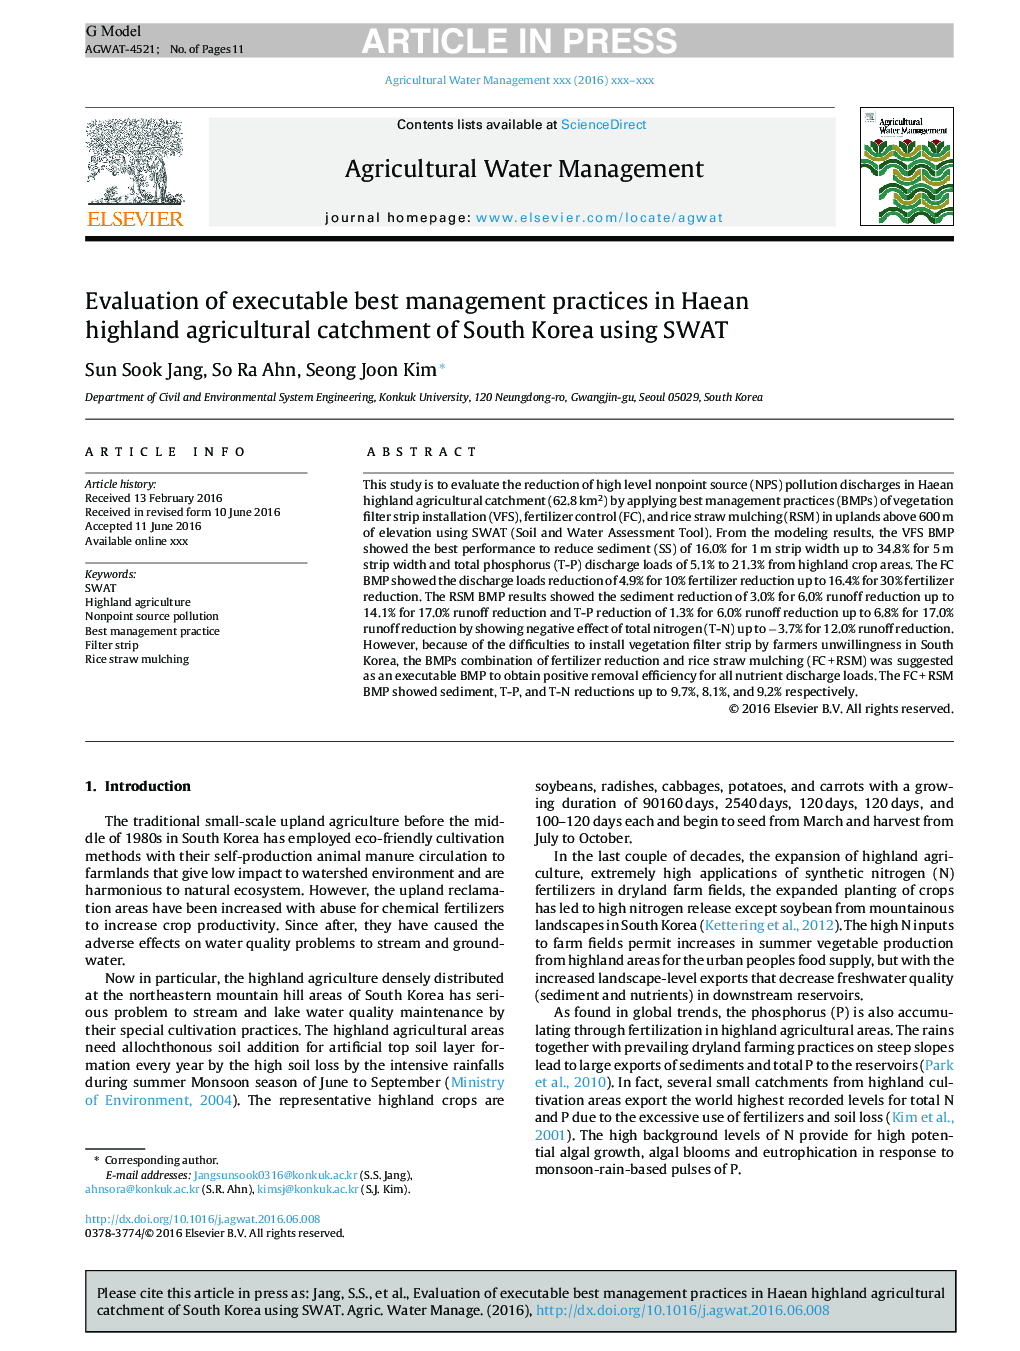 Evaluation of executable best management practices in Haean highland agricultural catchment of South Korea using SWAT